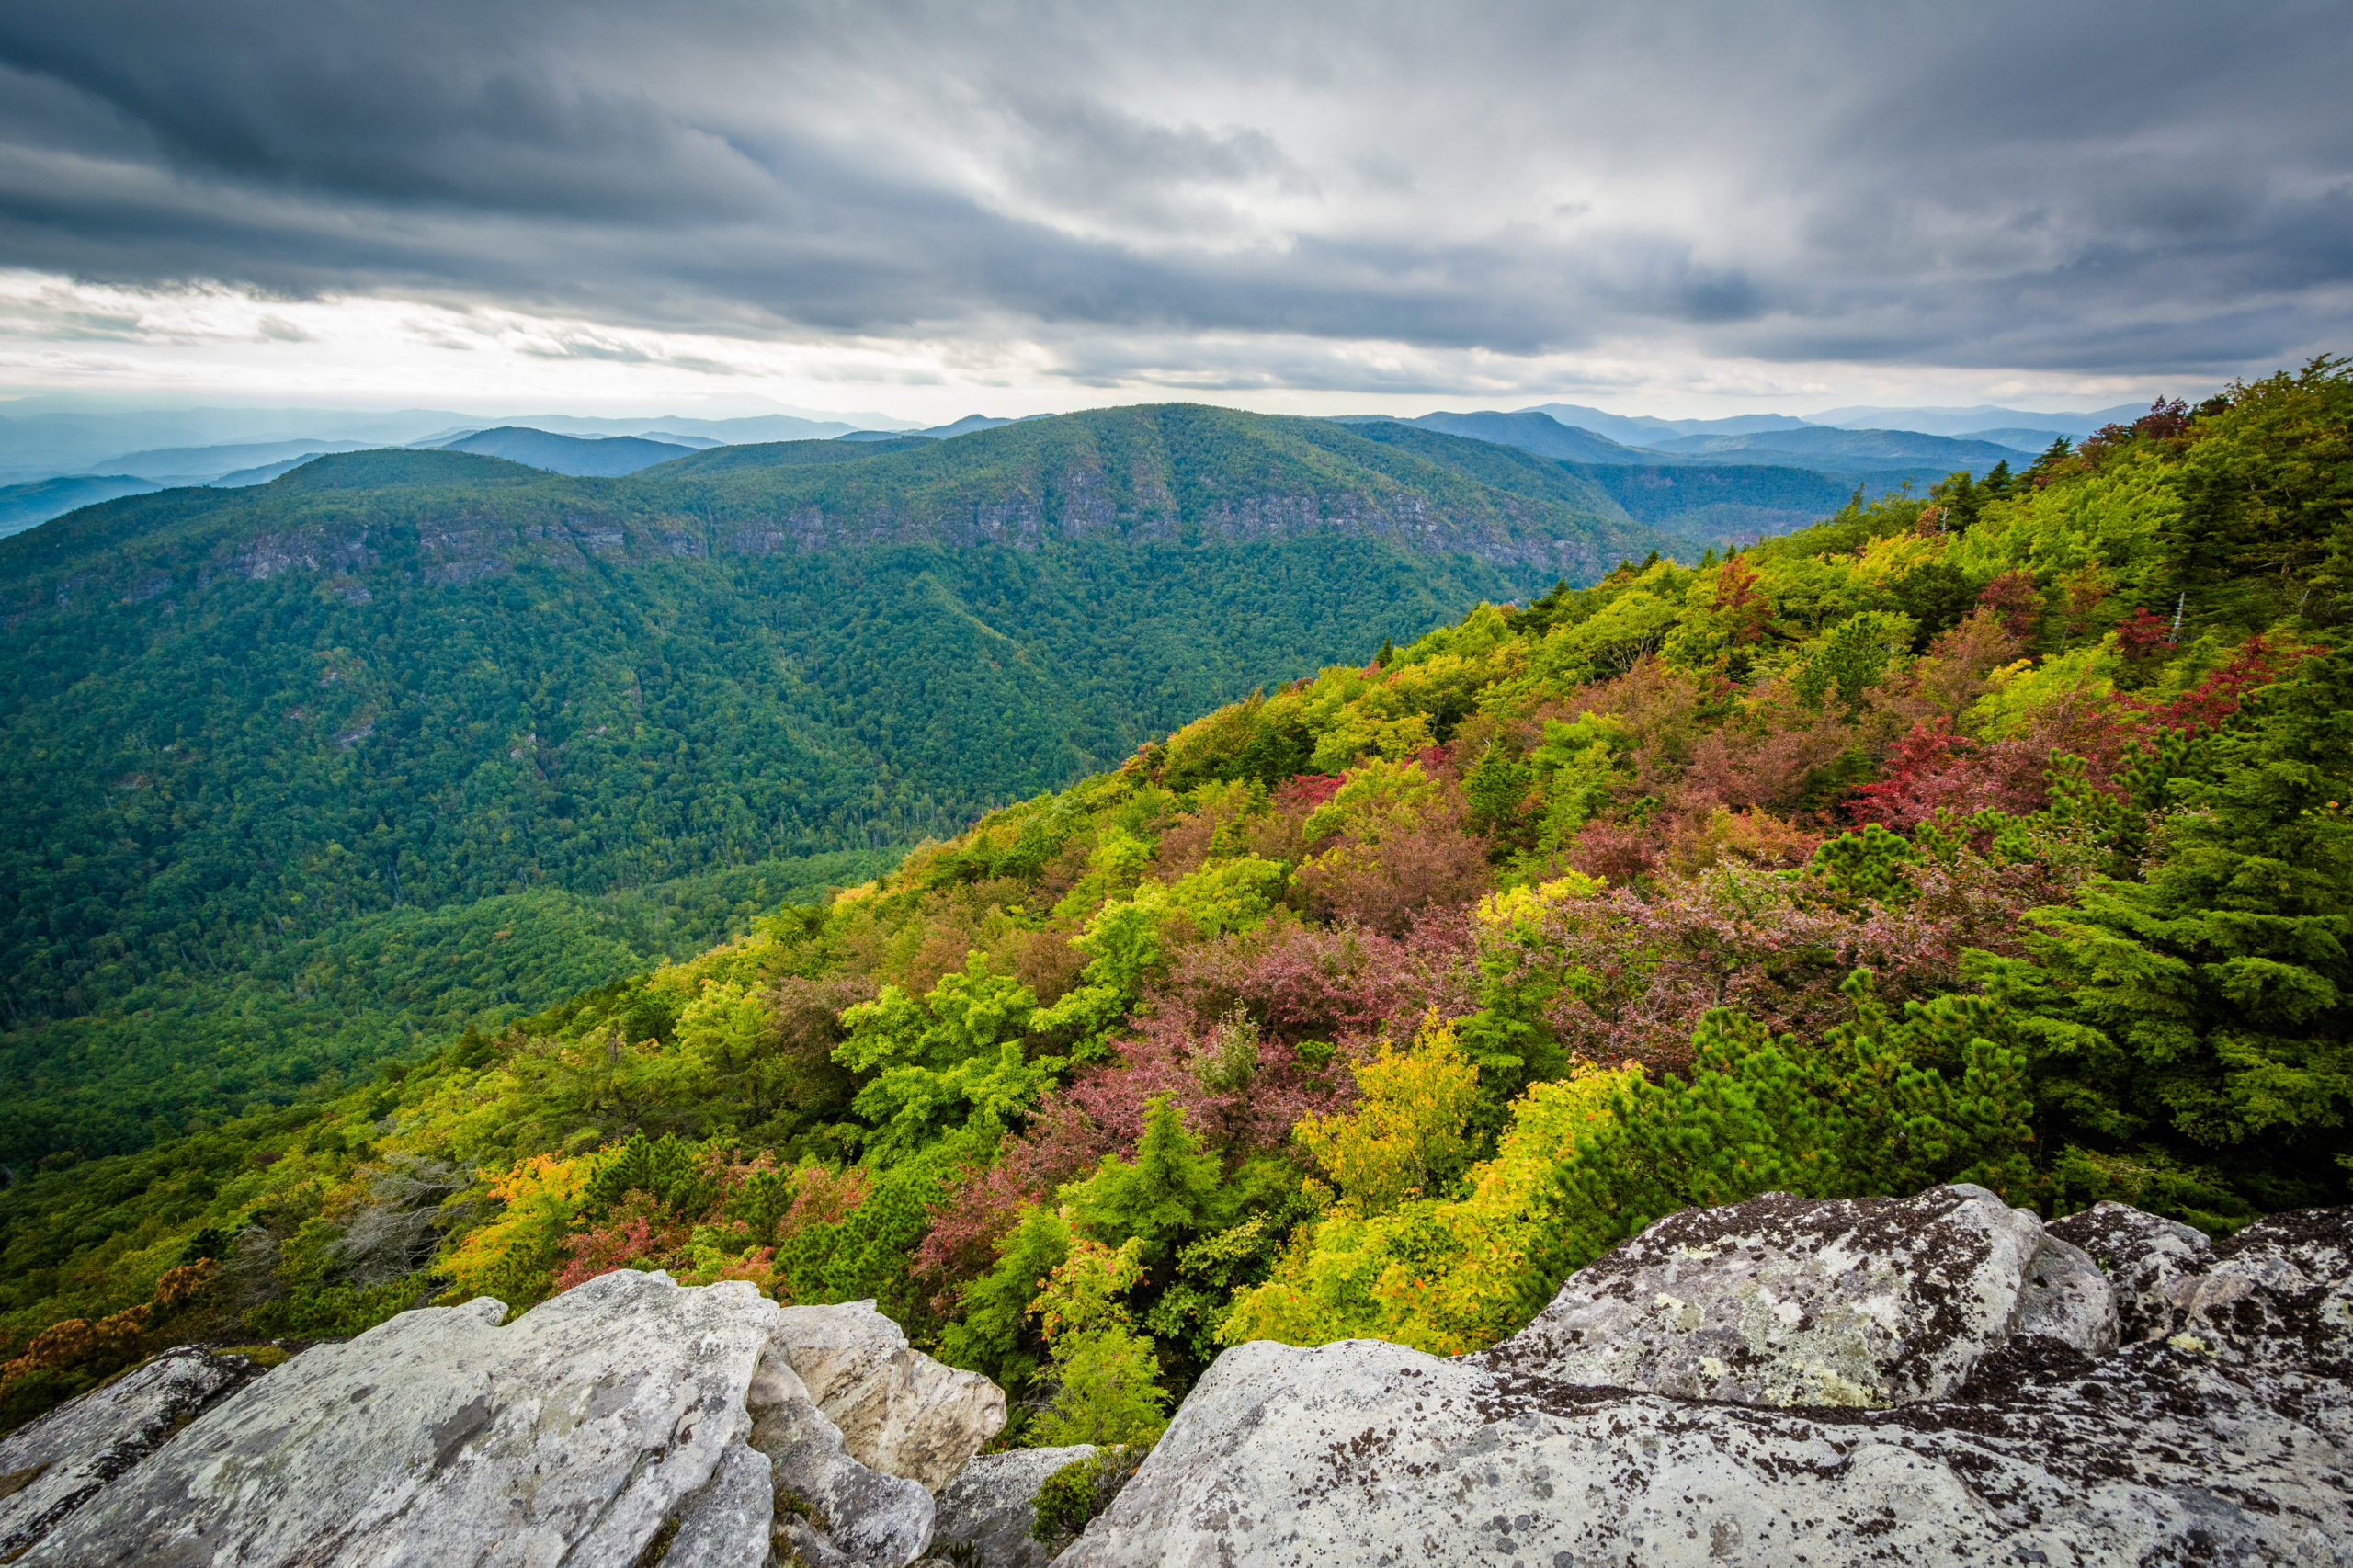 Mountain view of the Pisgah National Forest in North Carolina